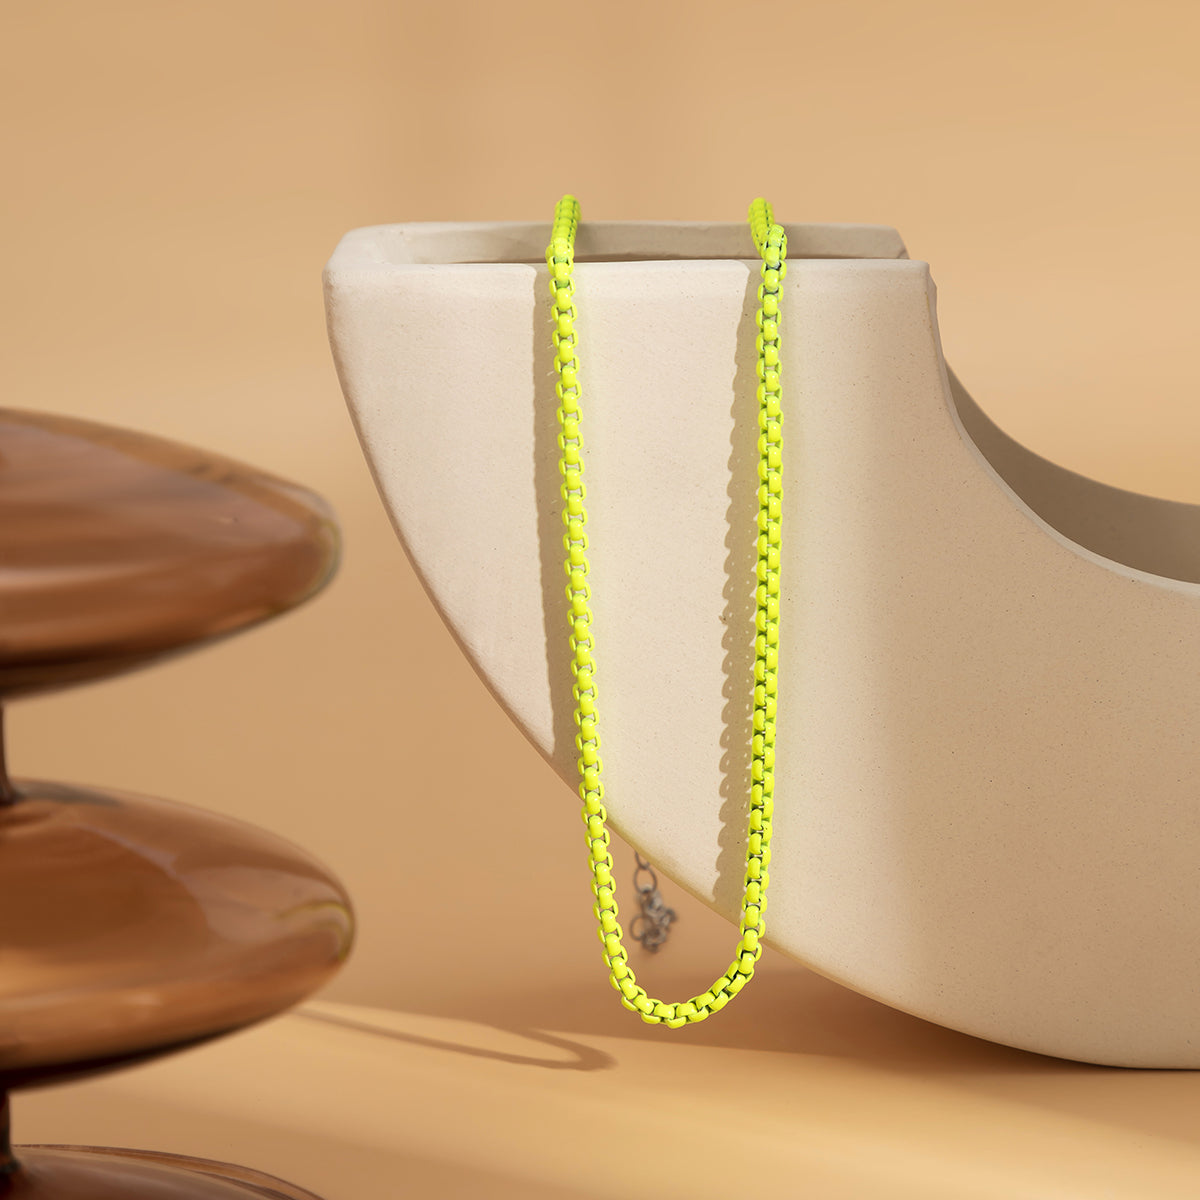 Fluorescent Green Enamel & Silver-Plated Chain Necklace